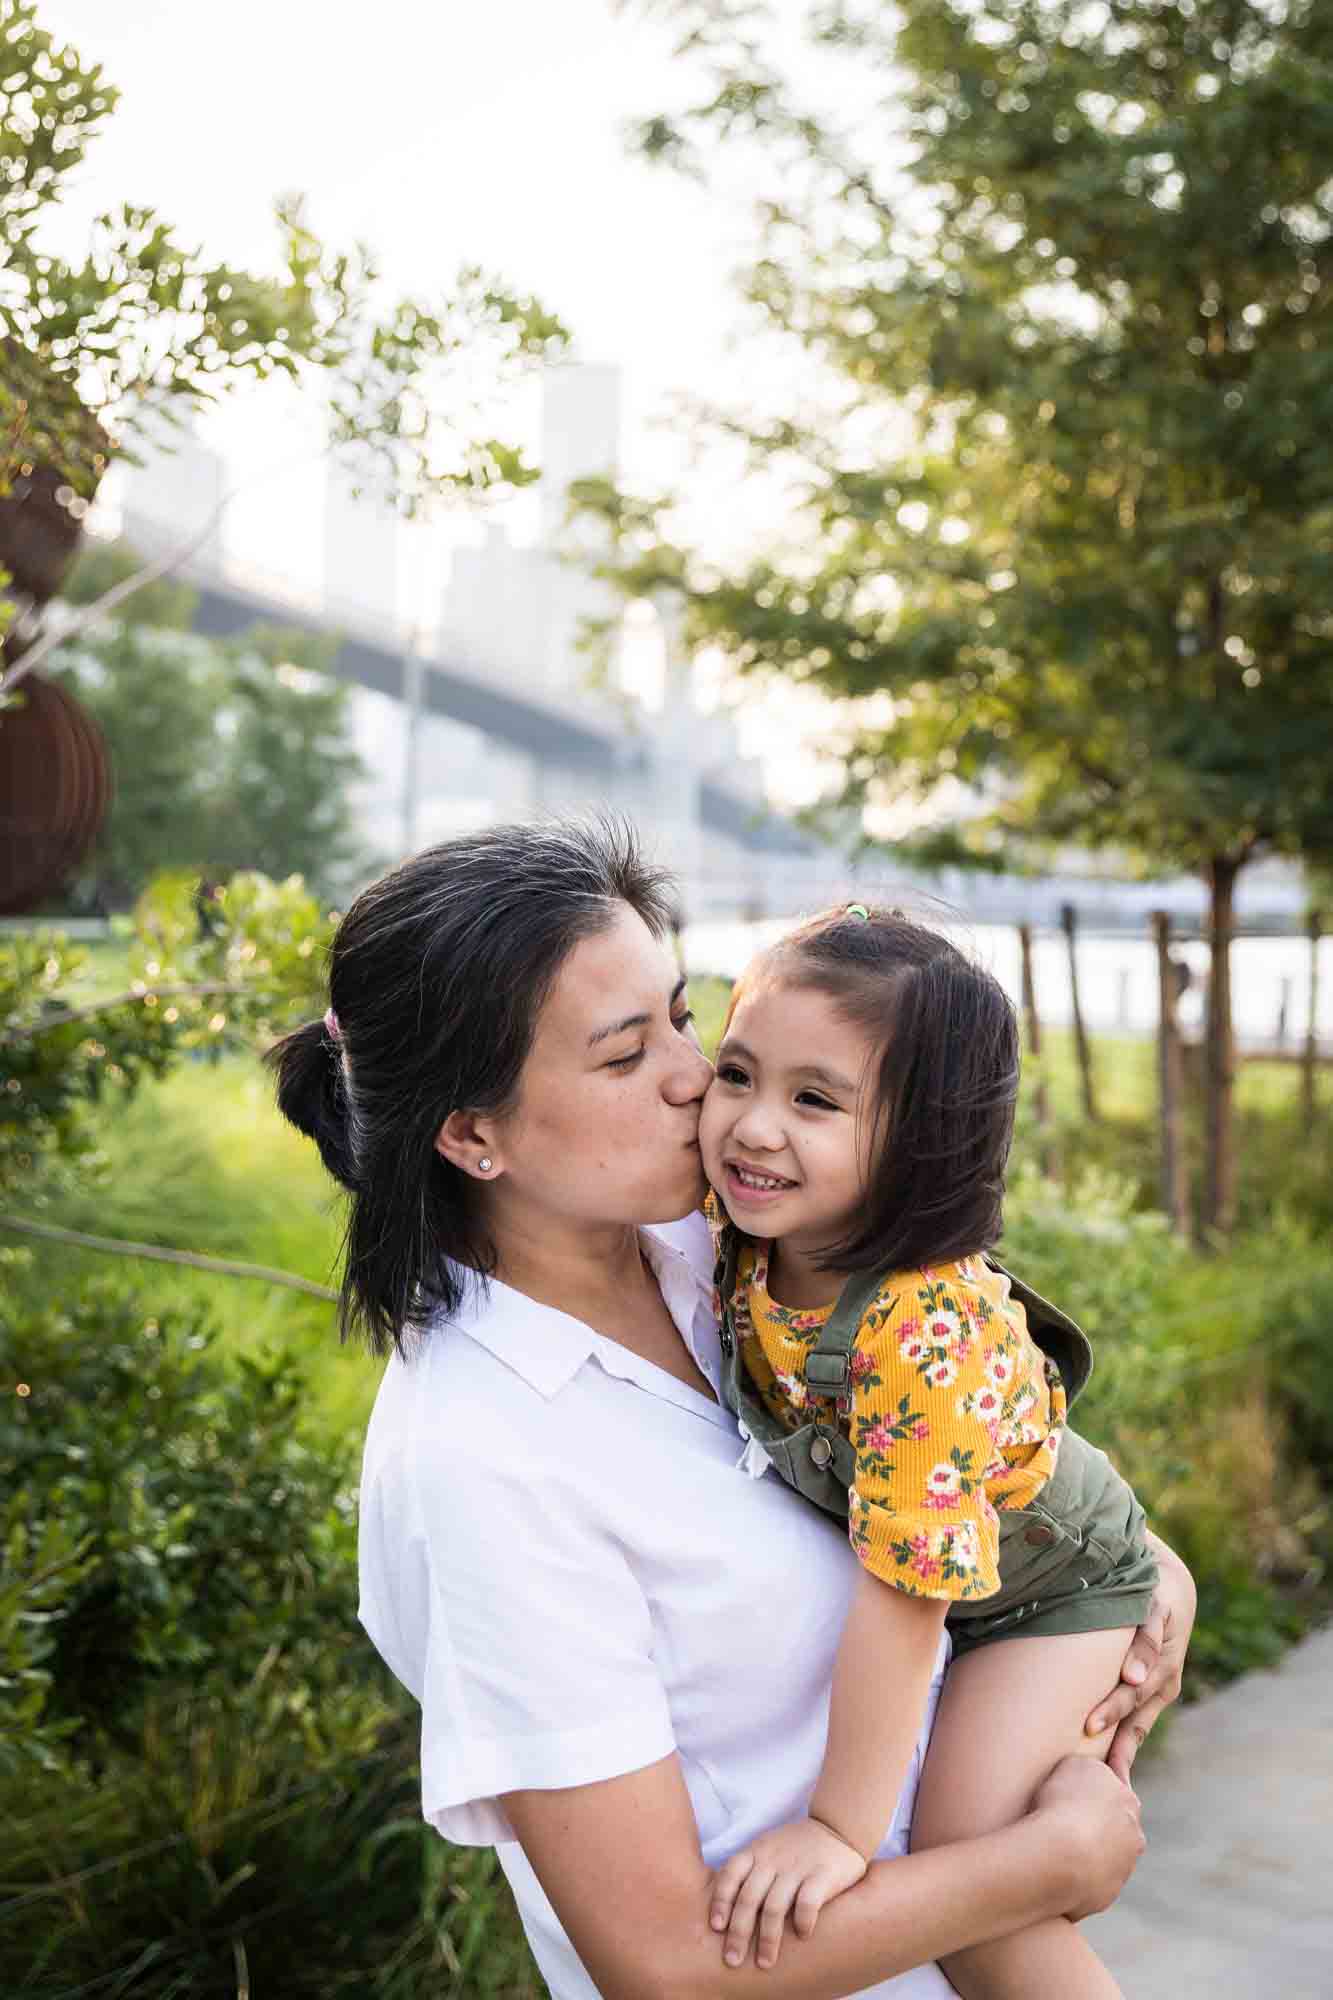 Mother holding young daughter in front of trees and bridge for an article on Brooklyn Bridge Park family portrait tips for young children